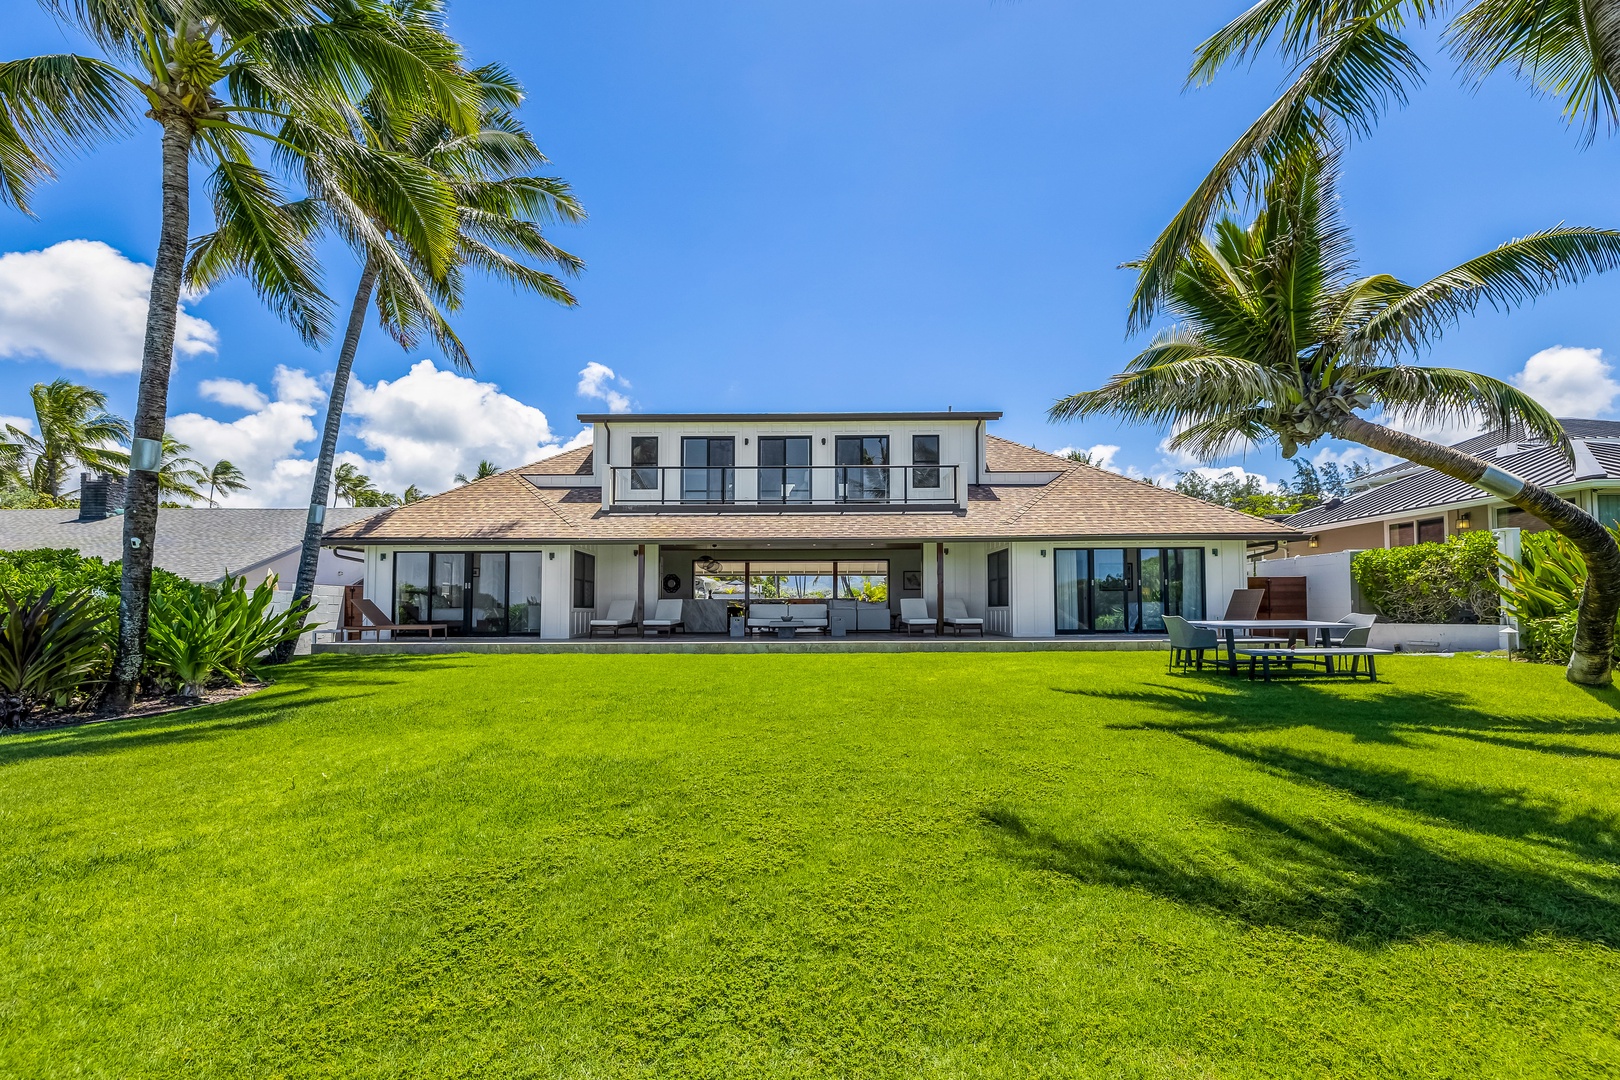 Kailua Vacation Rentals, Kailua Beach Villa - You'll love to call this gorgeous Hawaiian getaway your home away from home